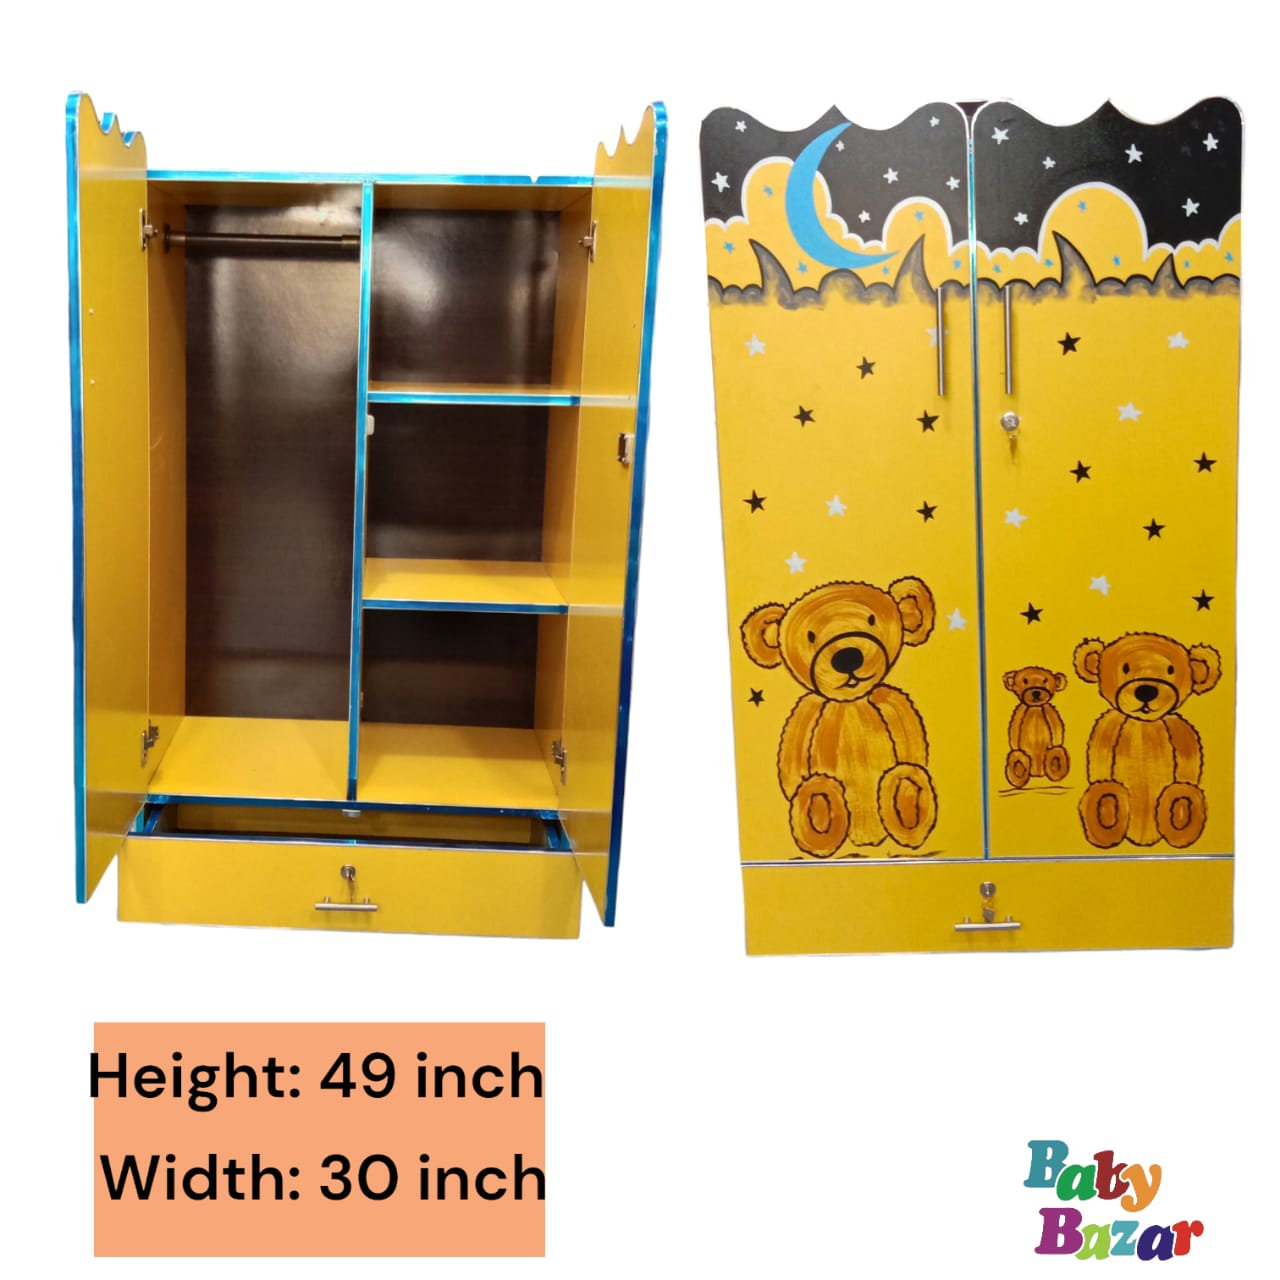 Stylish Wooden Baby Cupboard: Large hanging &amp; storage In cartoon Design (4x2.5ft)